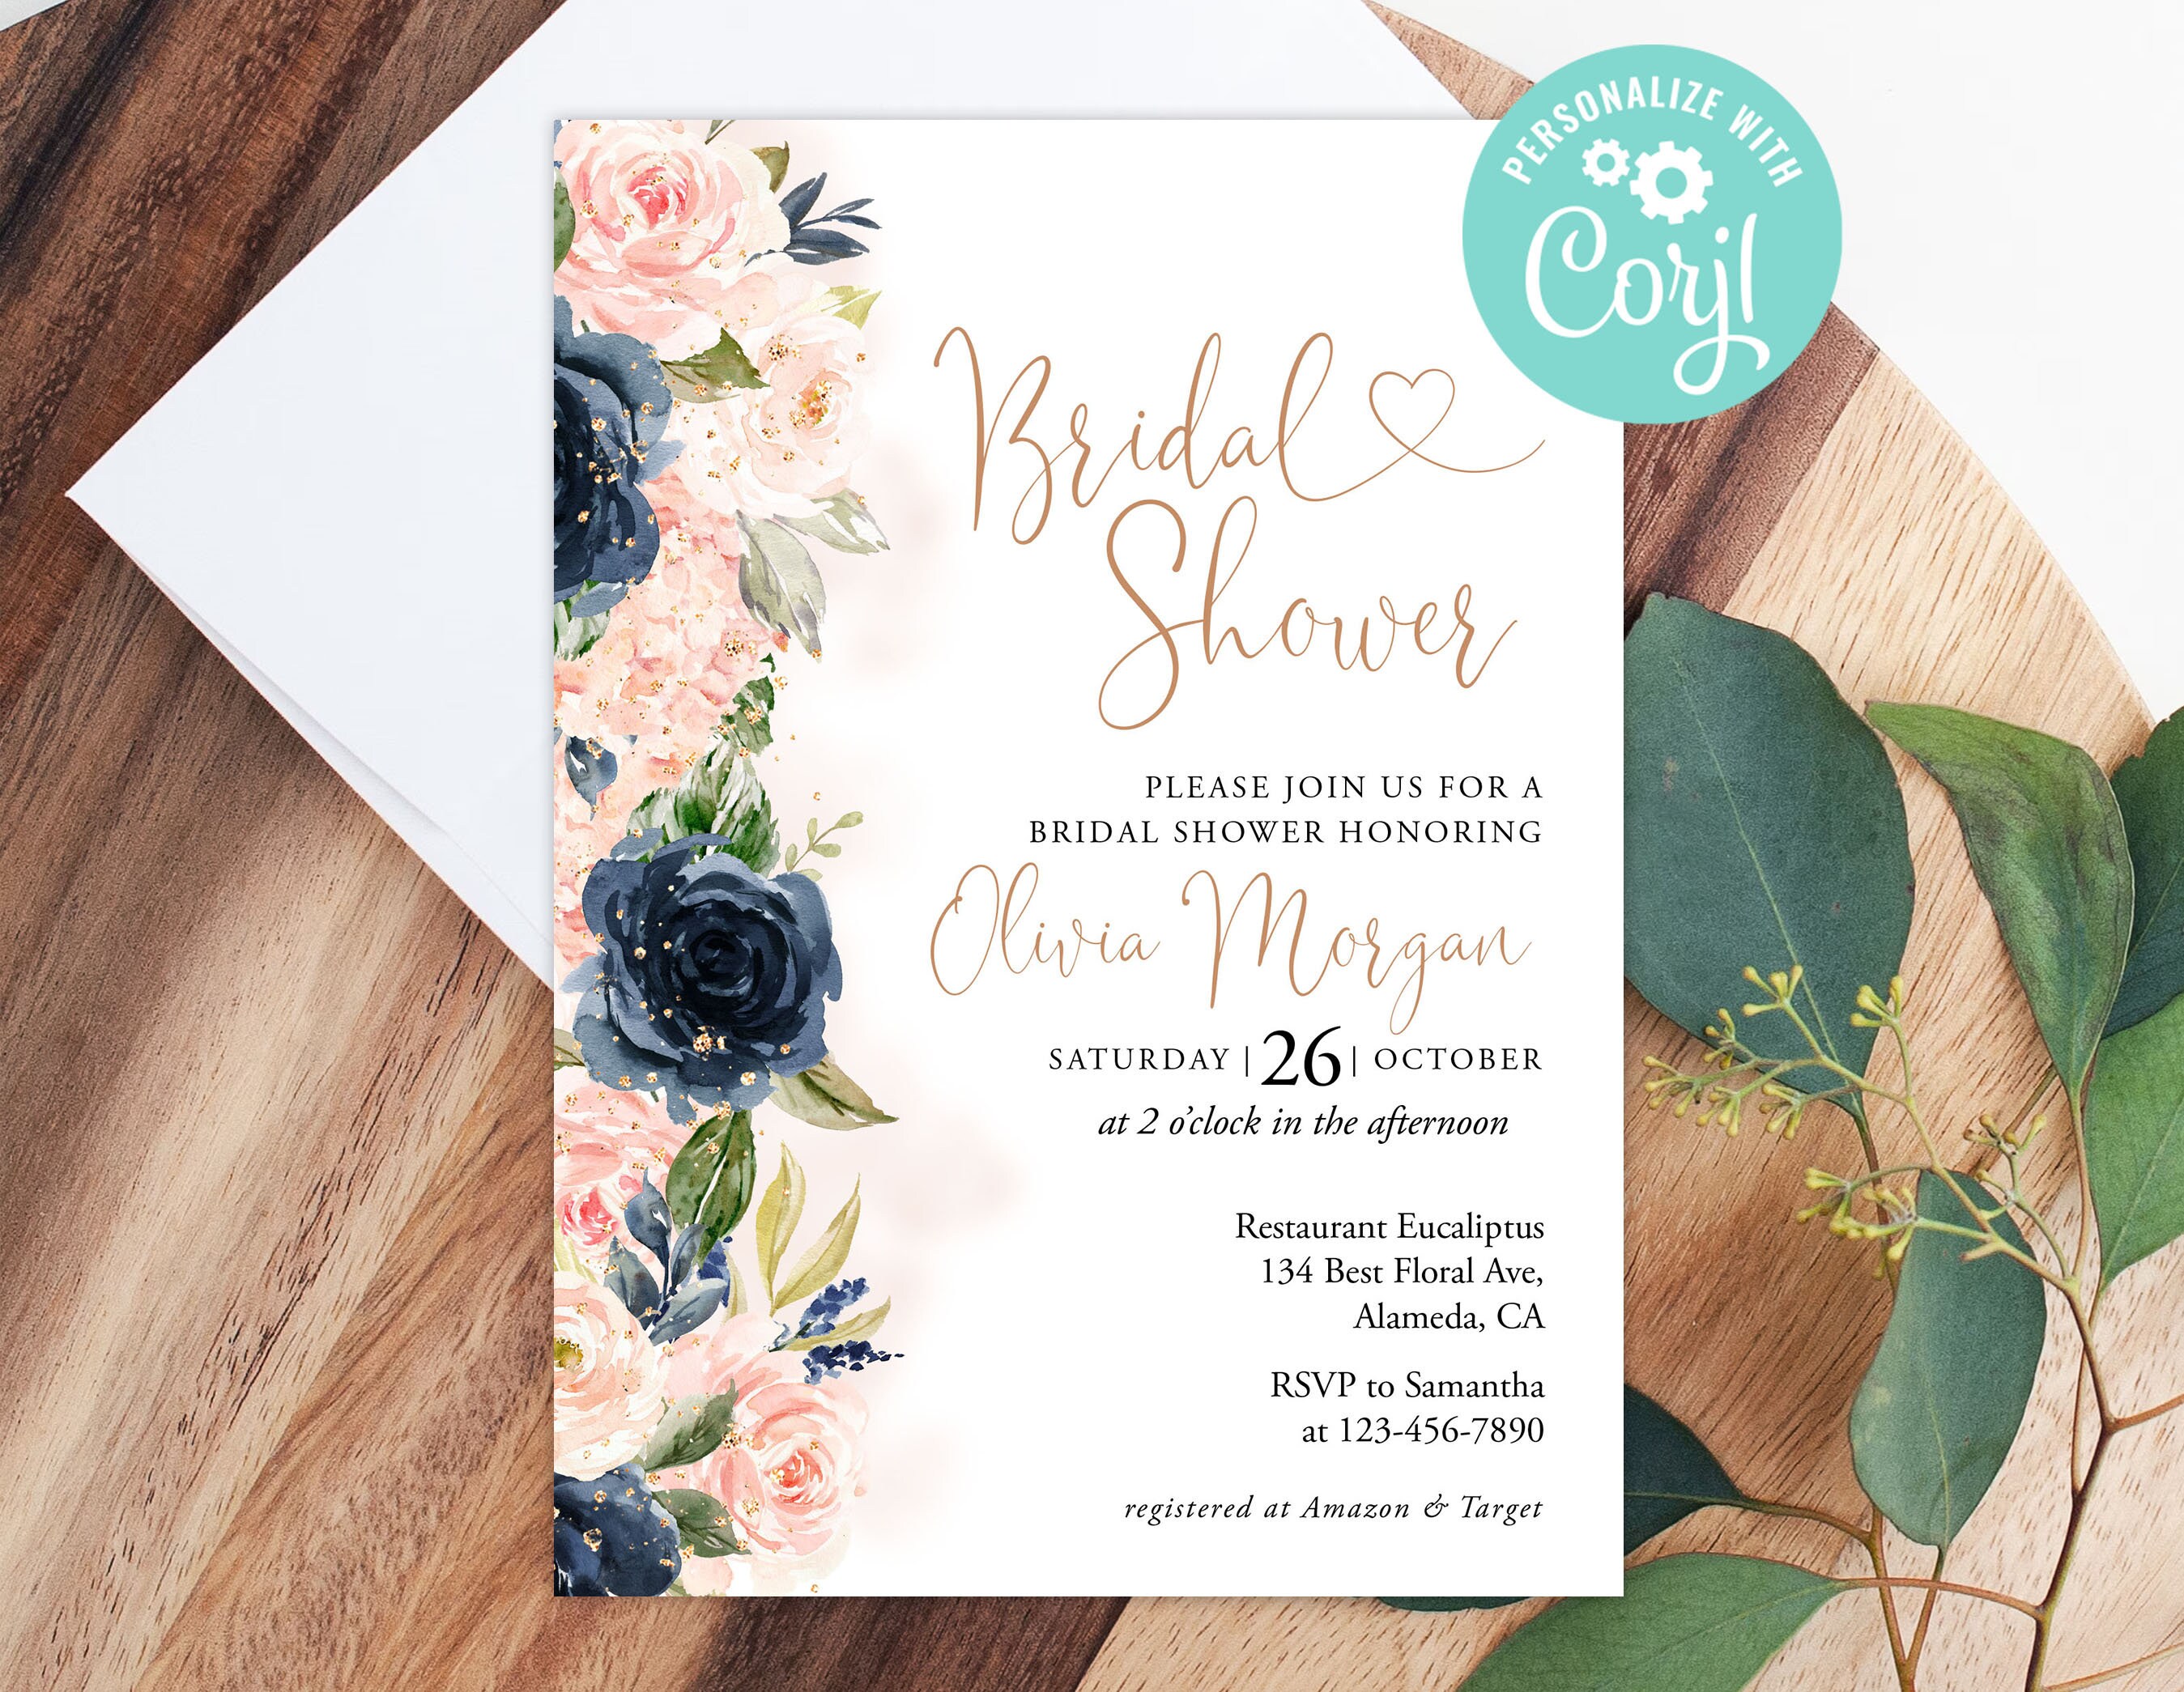 Blushing Bridal Shower Invitations with Envelopes (25 Pack) Blank  Invitation for Wedding Showers, Bride Luncheon, Bubbly – Navy Blue and Pink  Theme